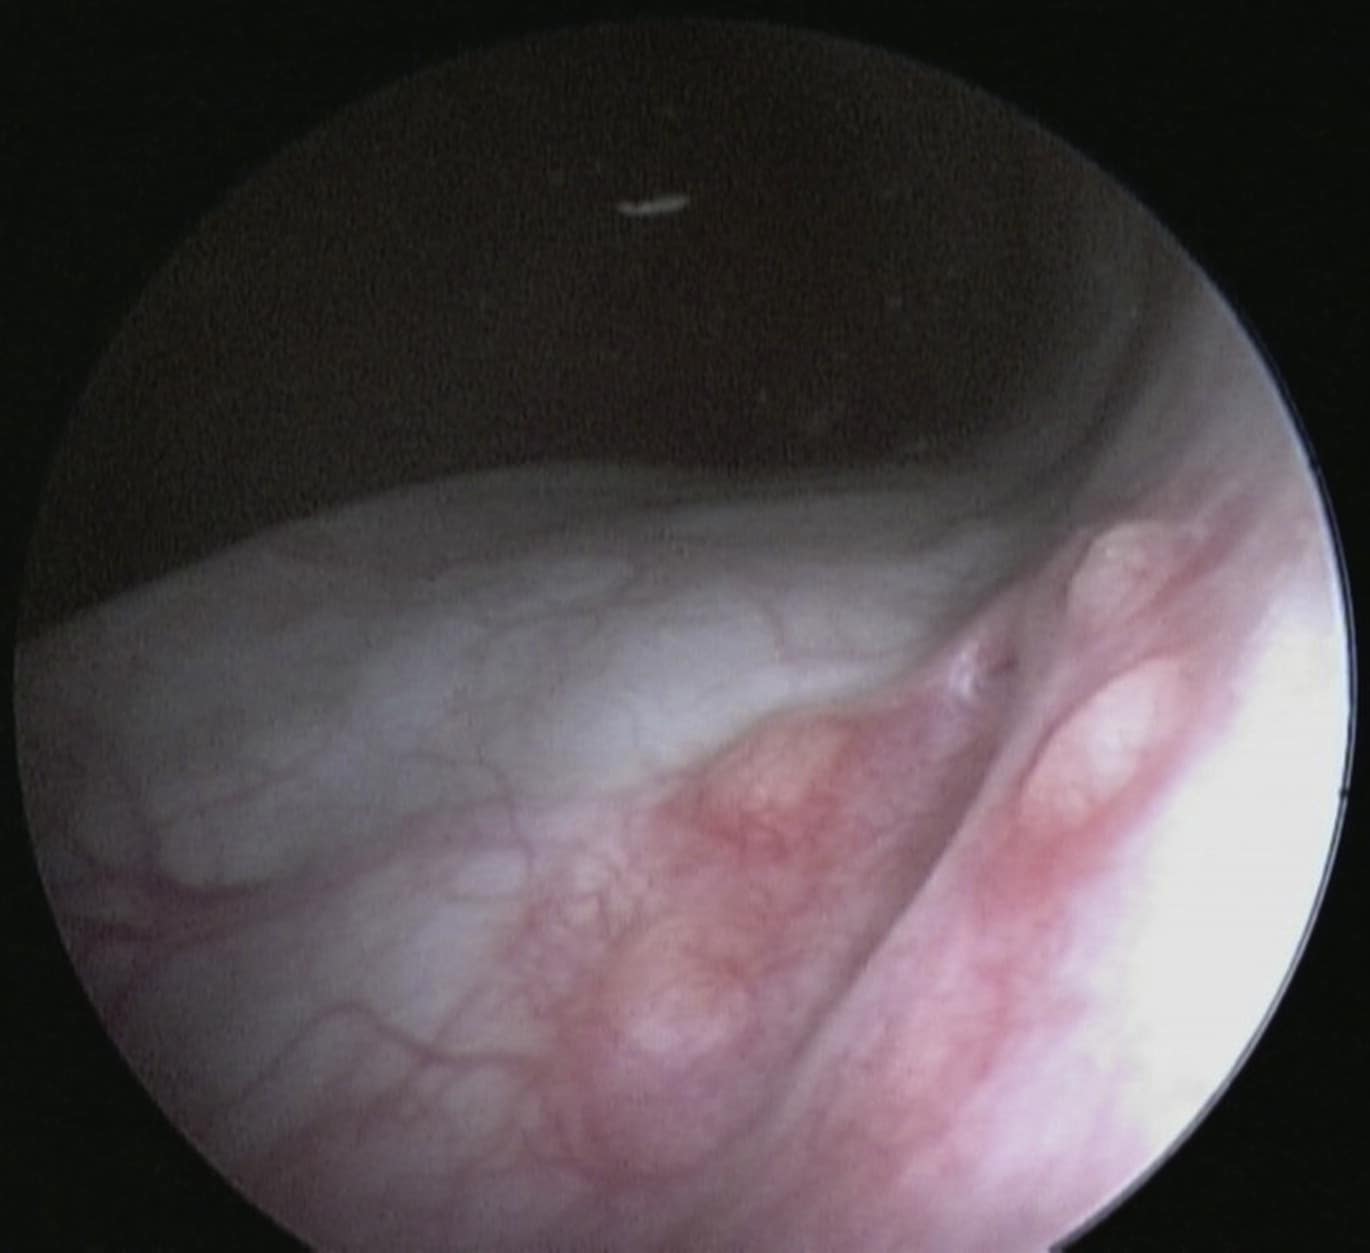 Cystoscopy in Dogs and Cats